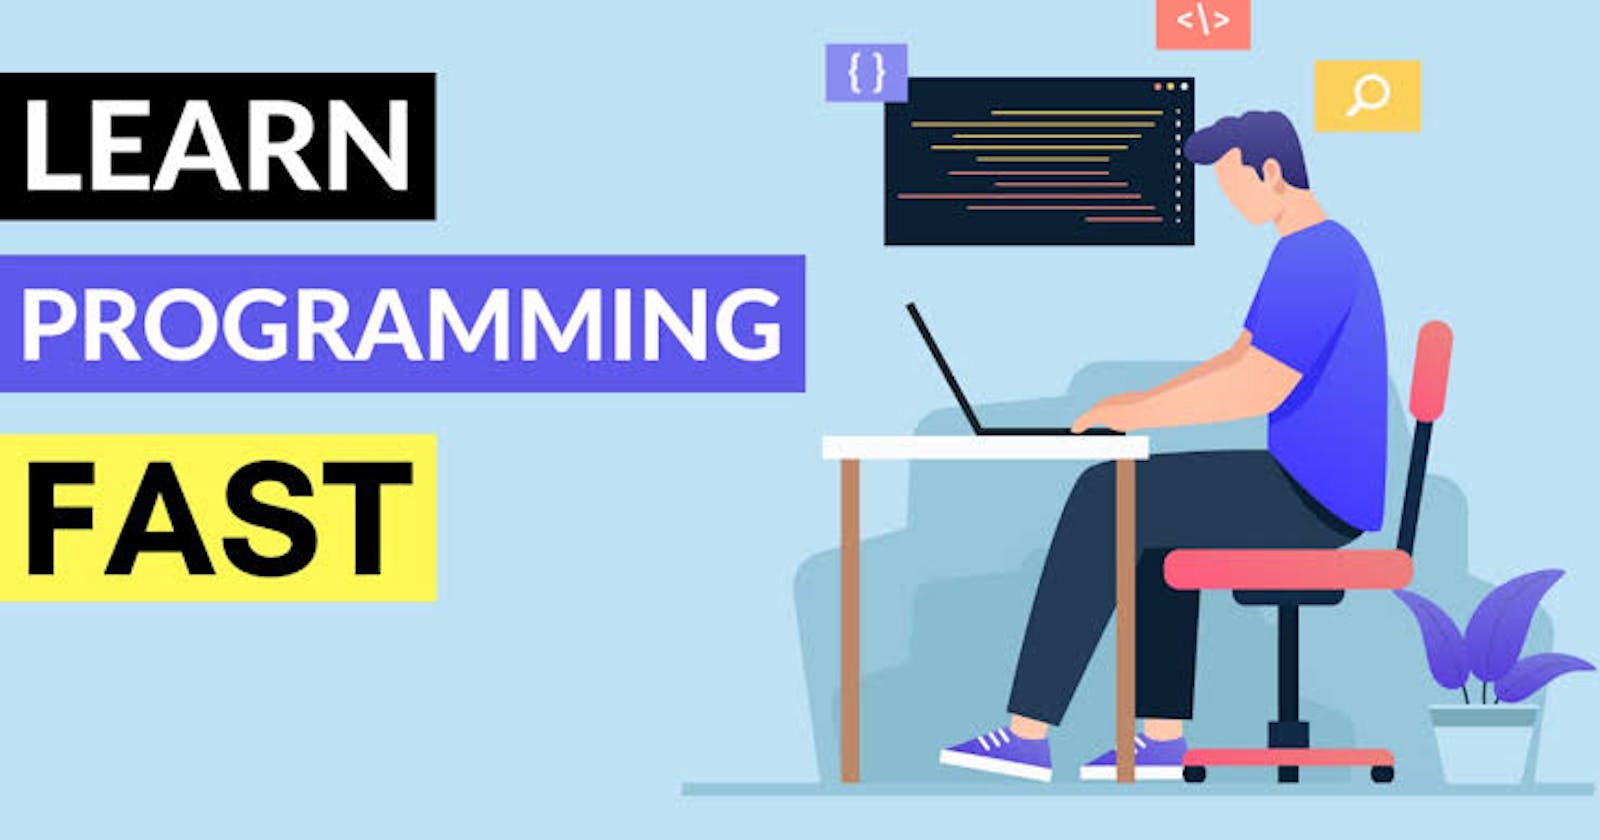 Gain interest in programming and start coding fast